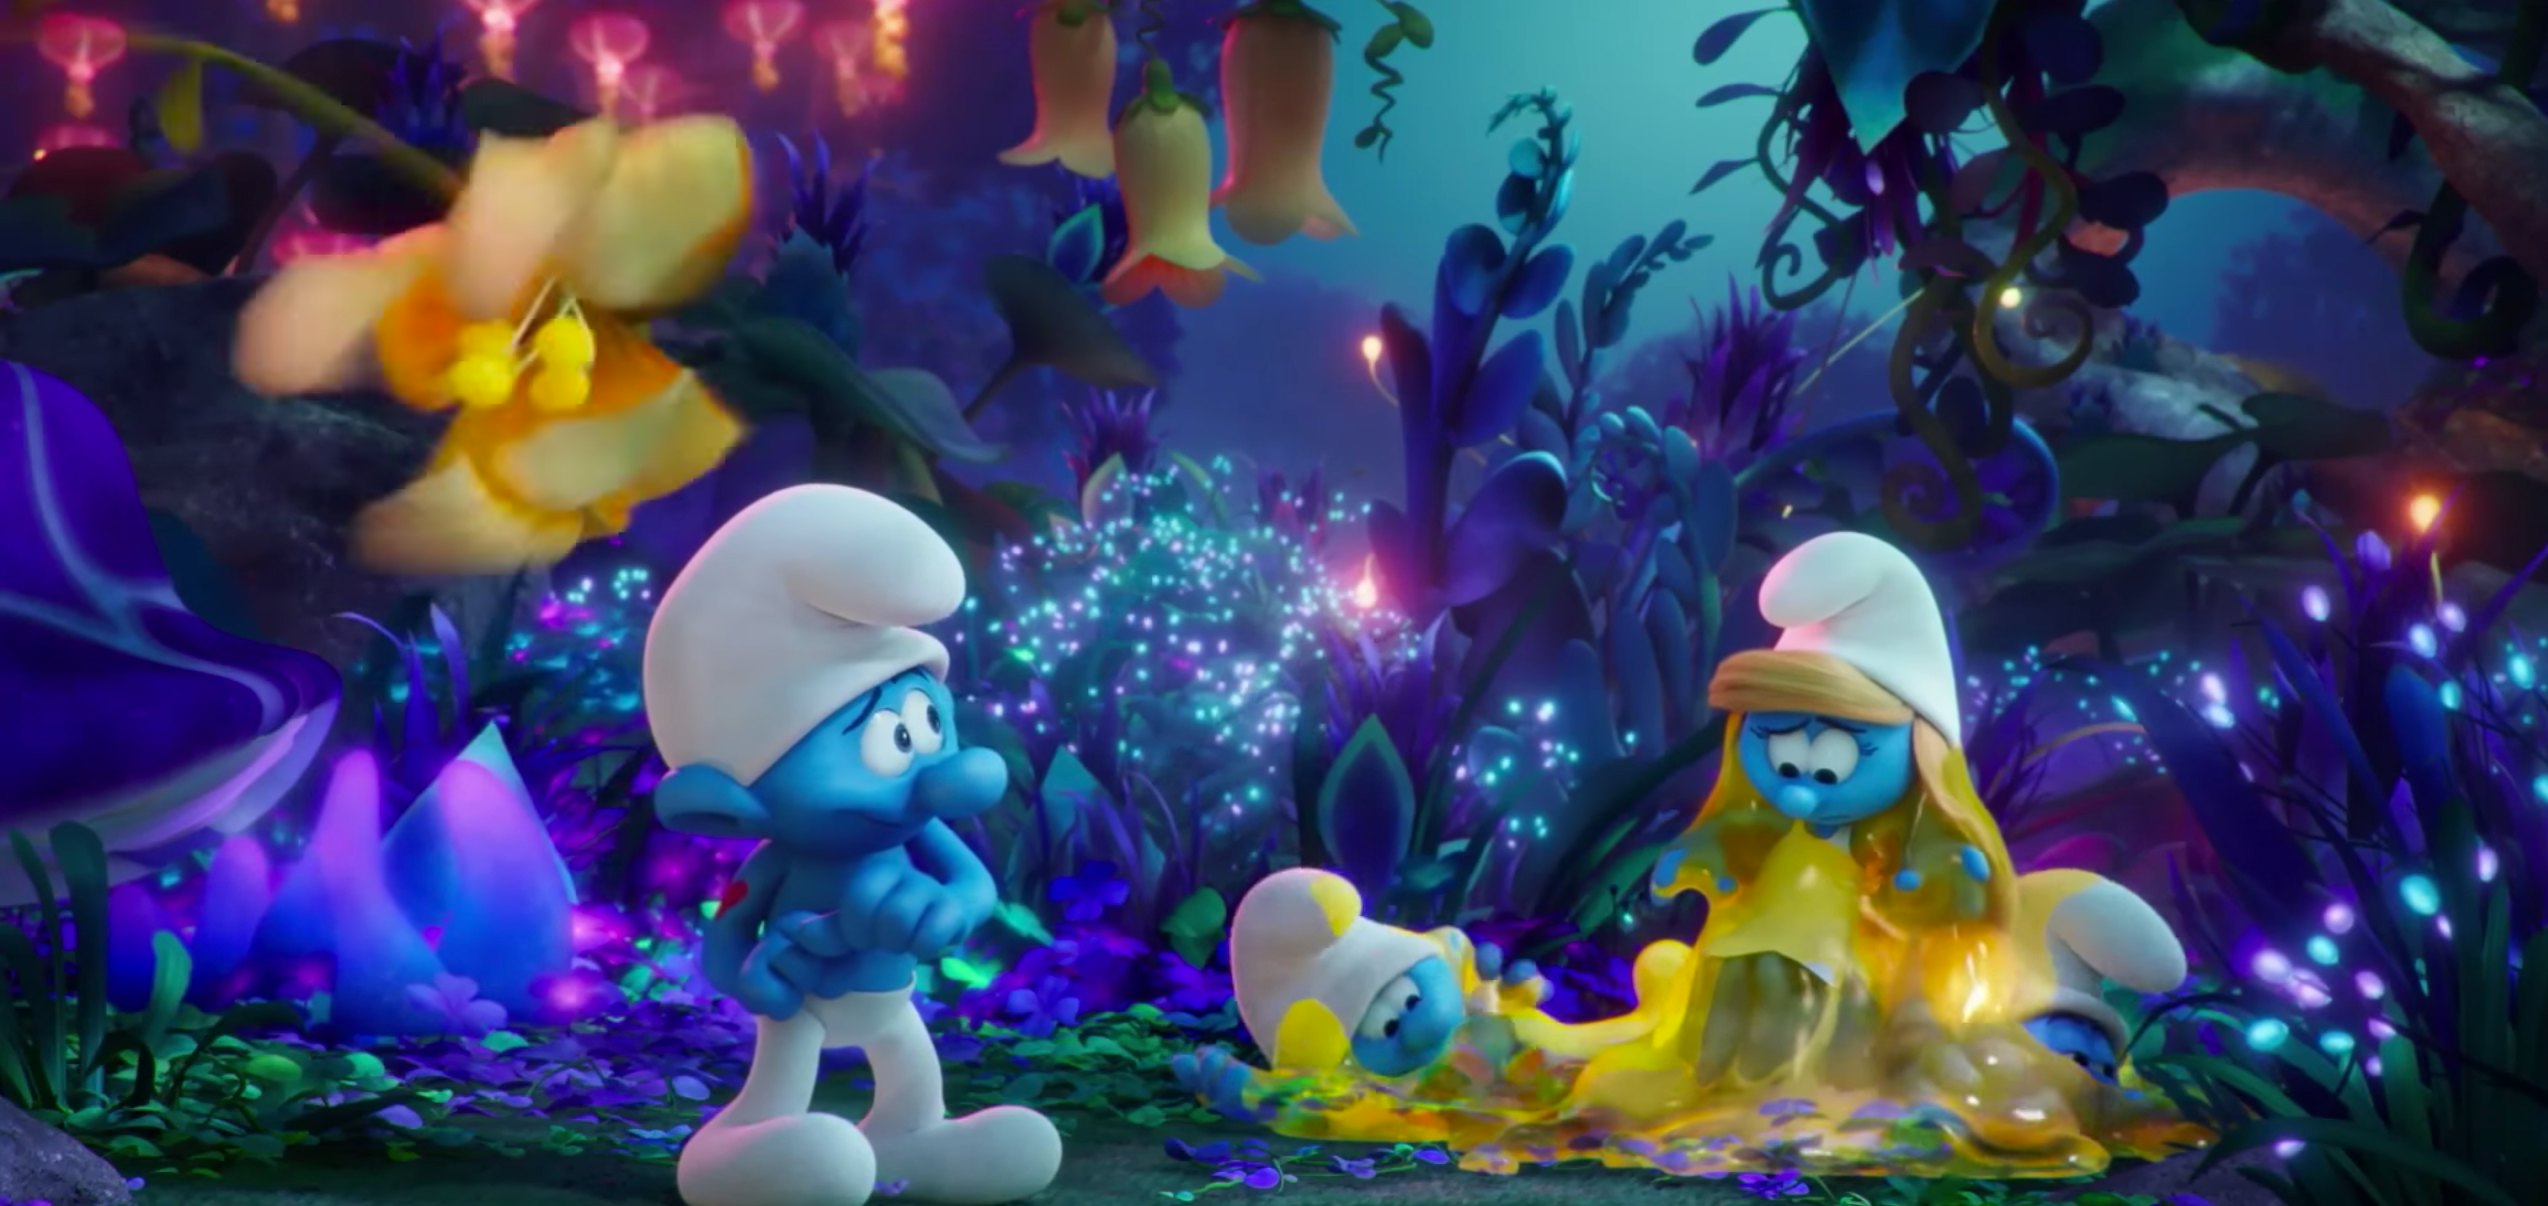 The Smurfs The Lost Village Trailer Song Is Going To Be